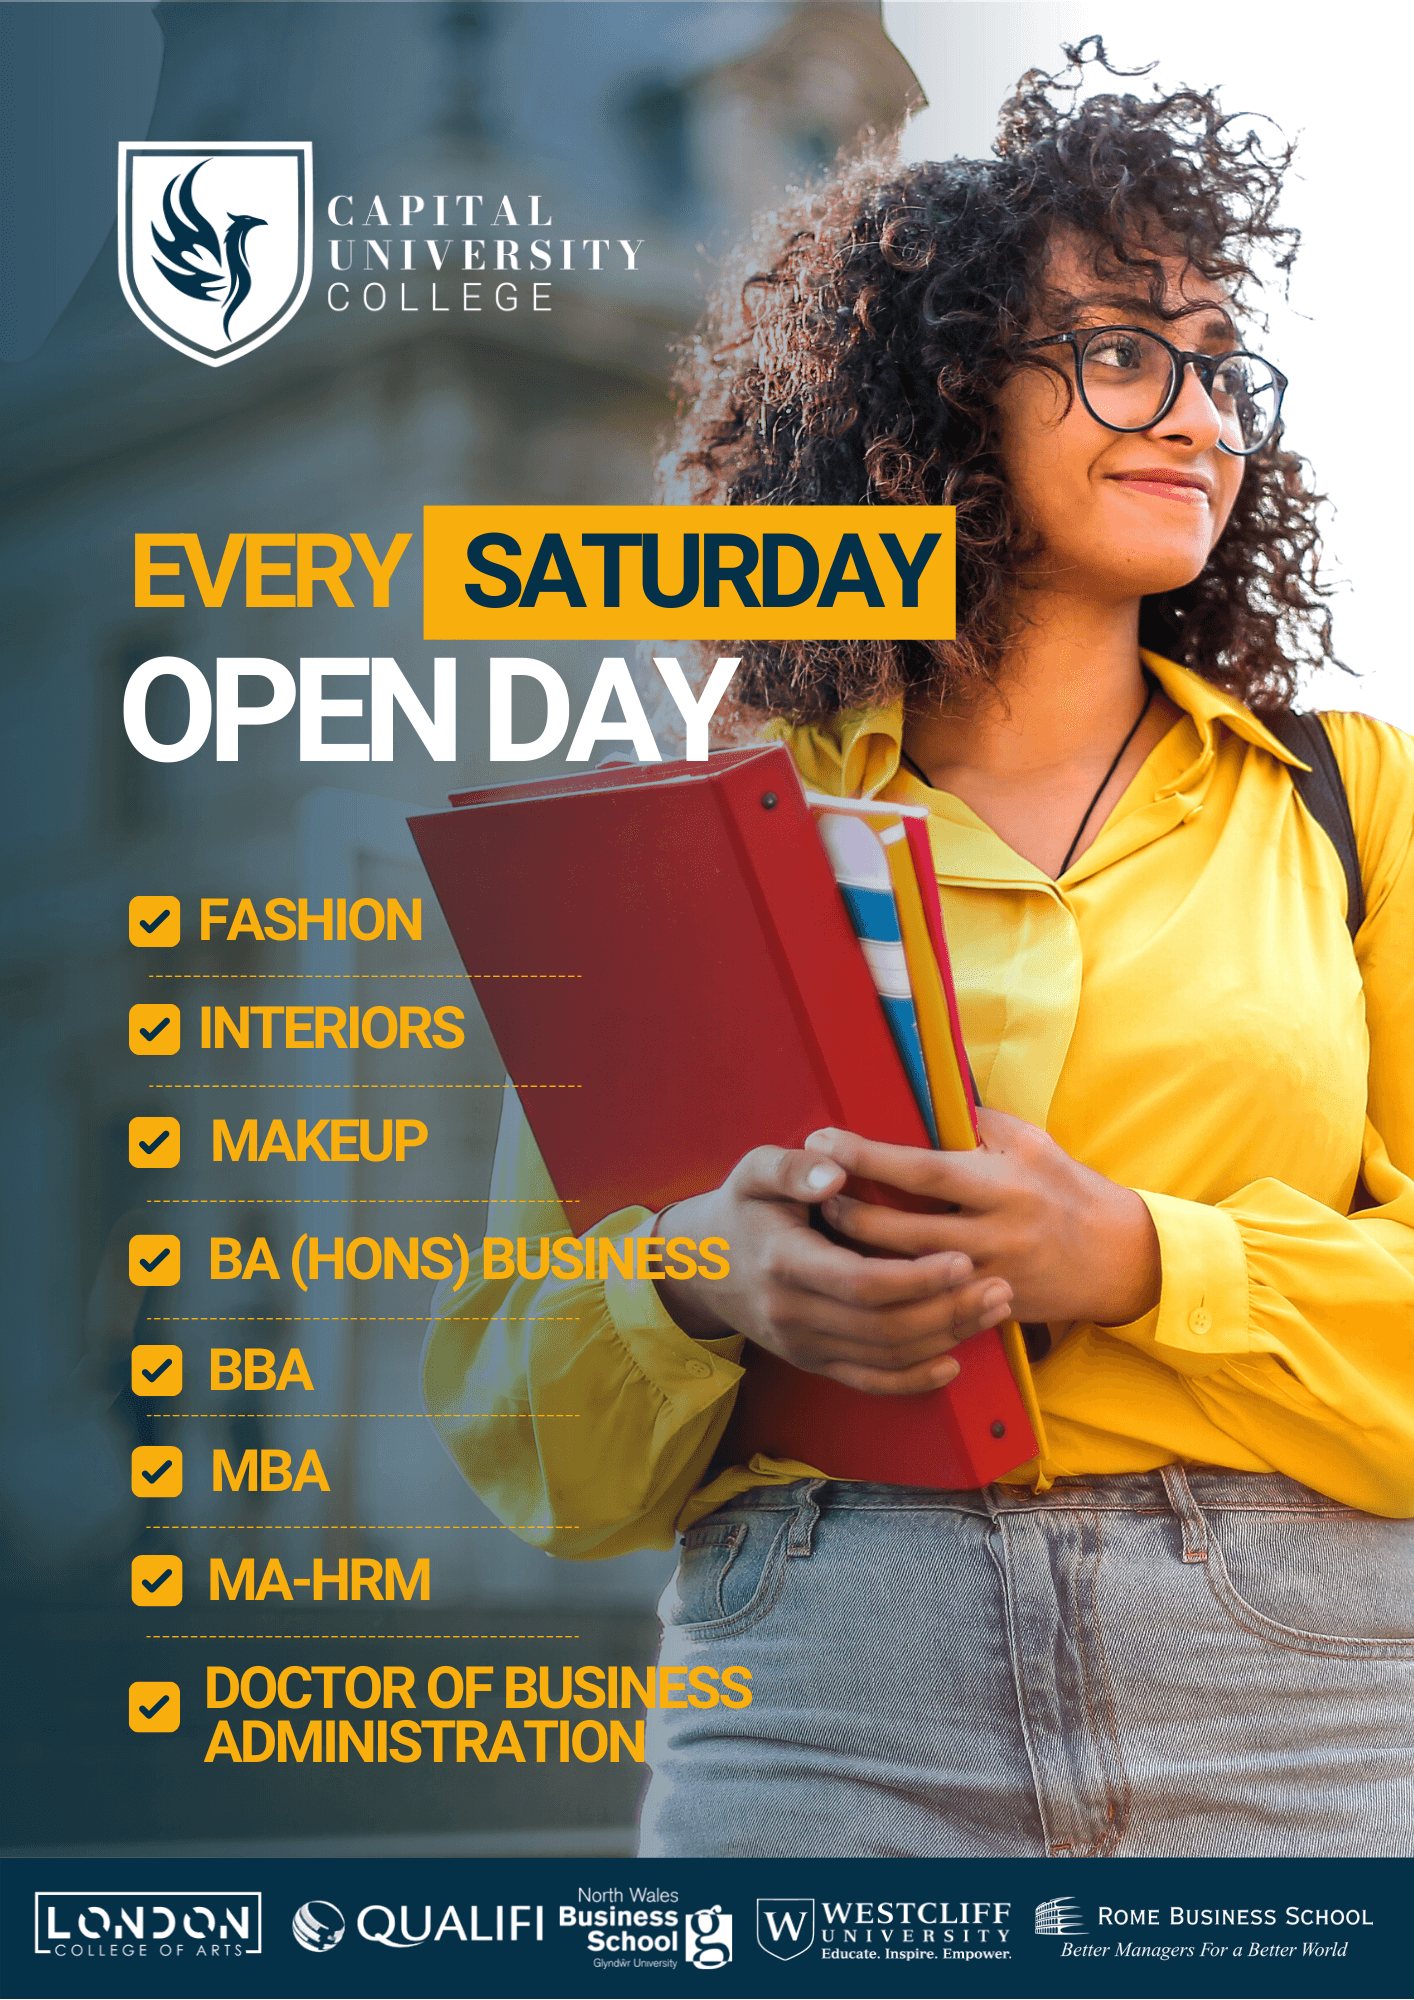 Every Saturday Open Day